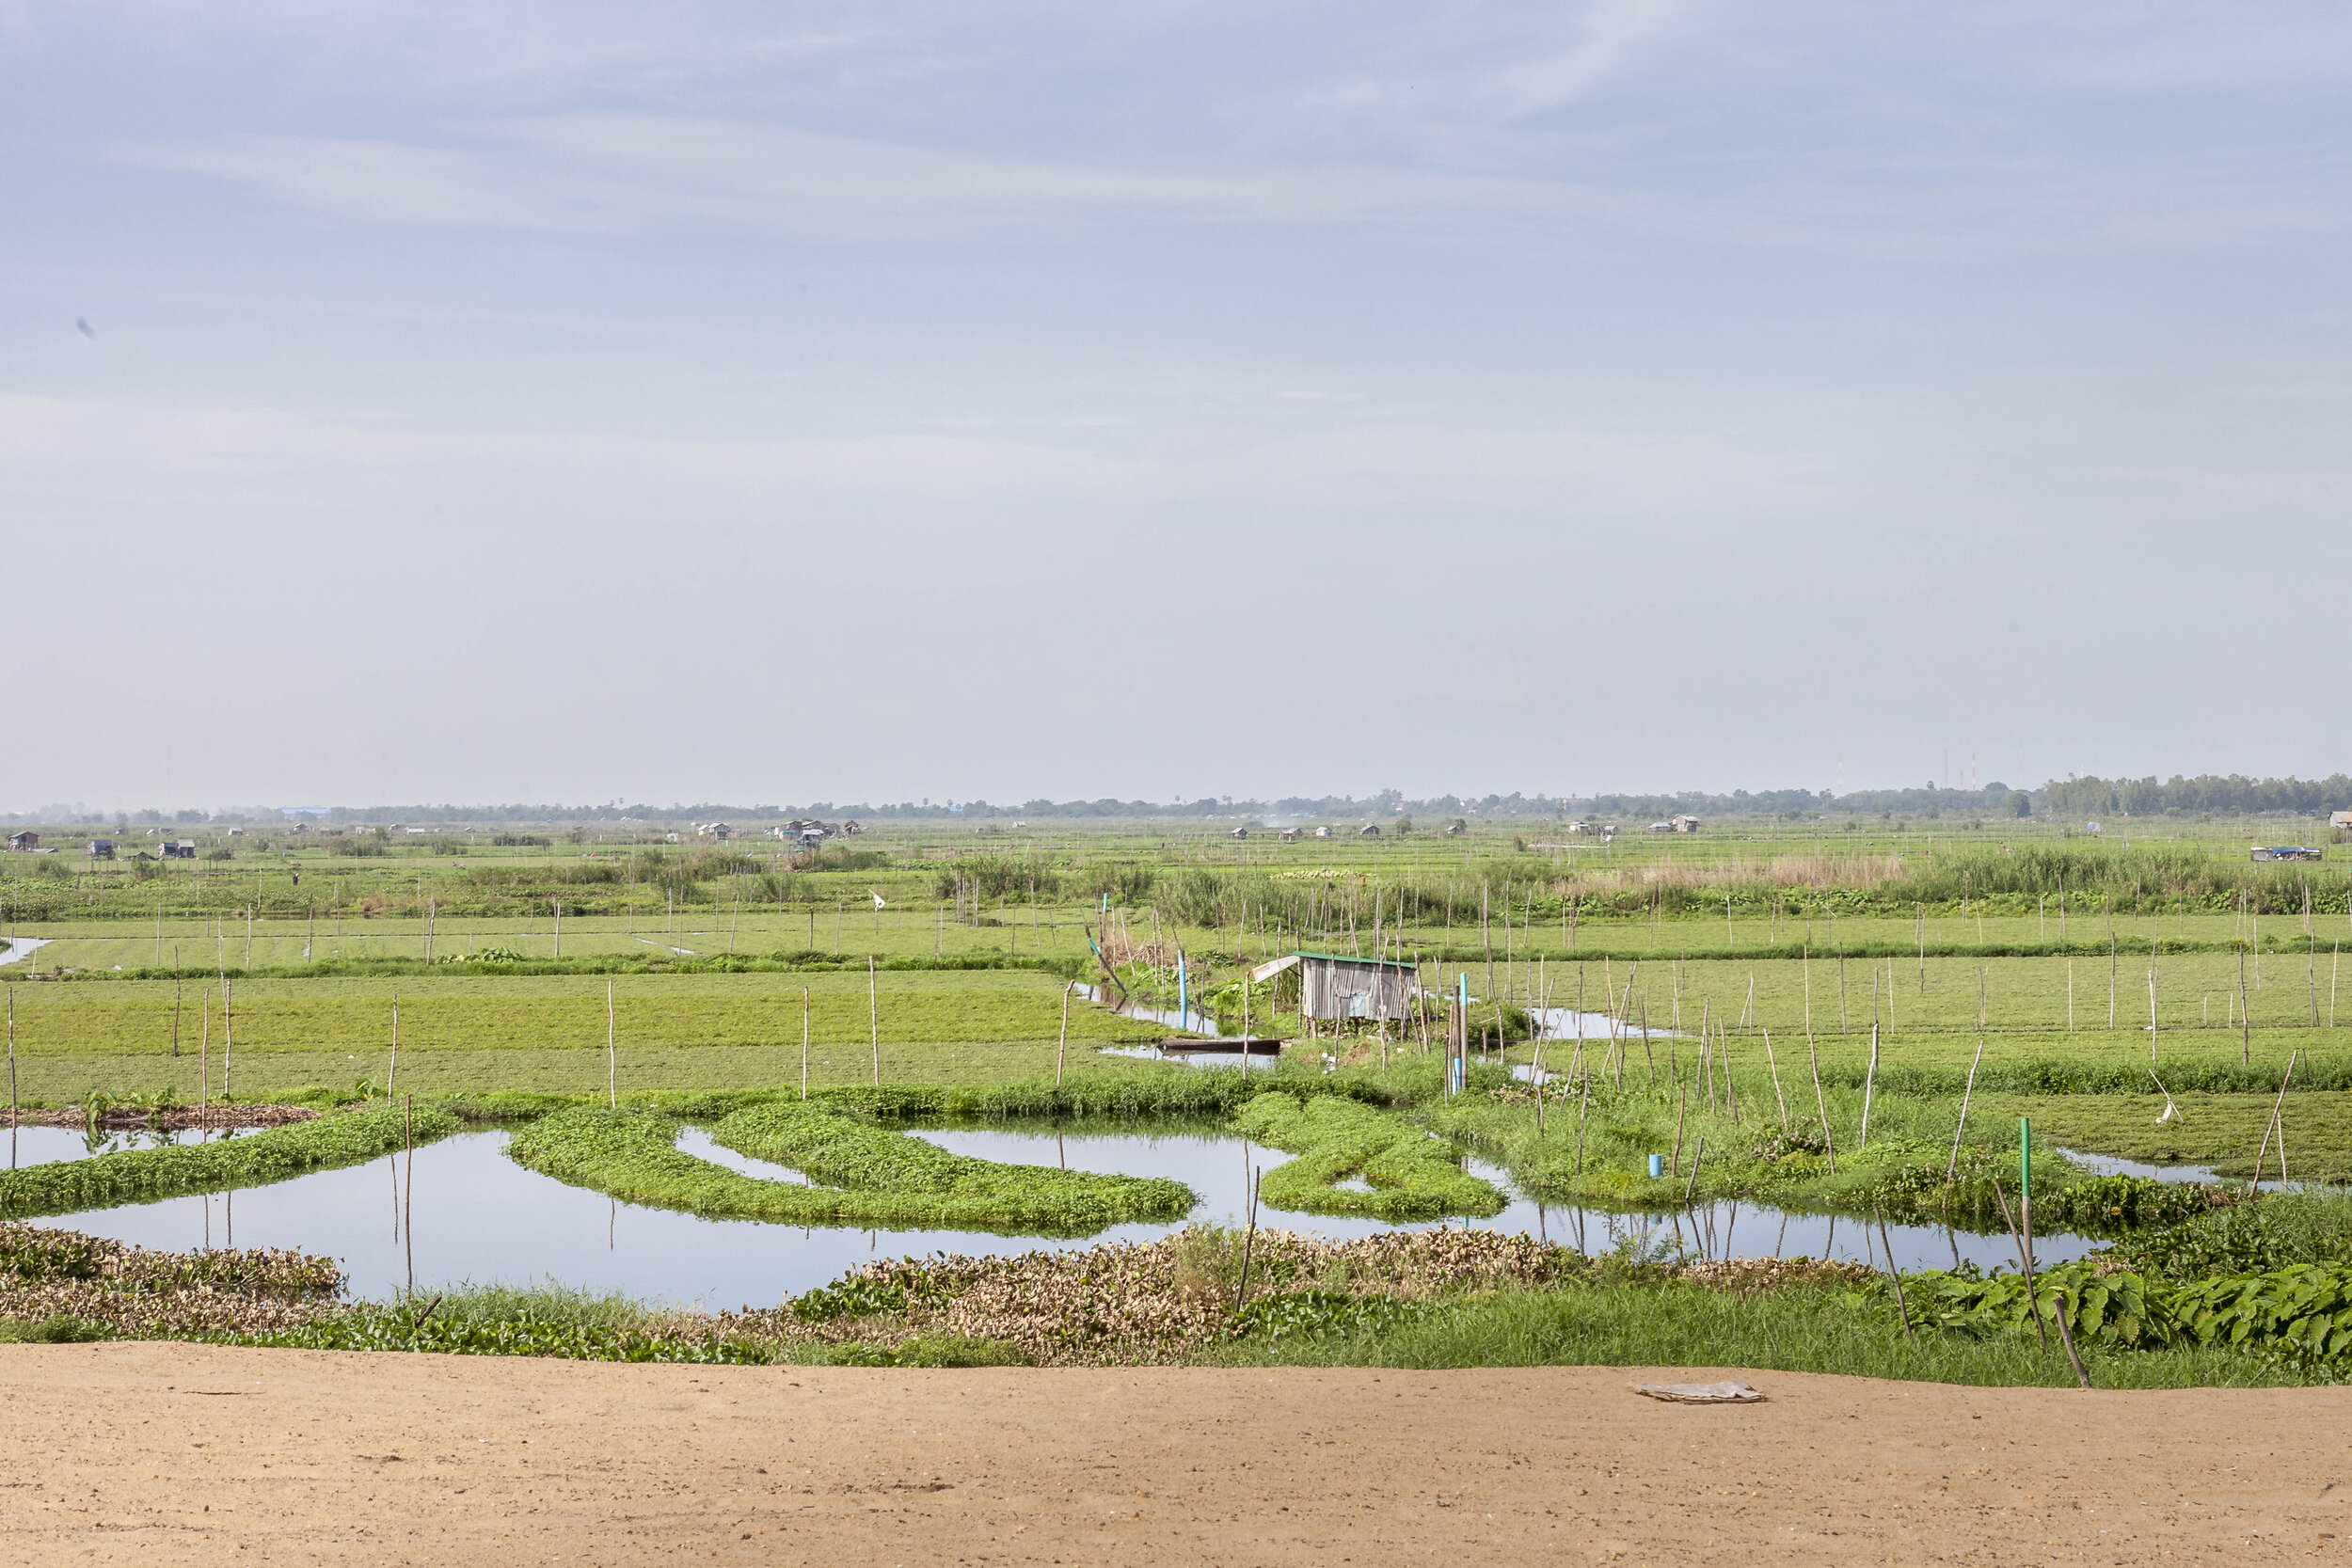  A view across Boeung Tompun from an area newly ‘reclaimed’ by sand-pumping.  